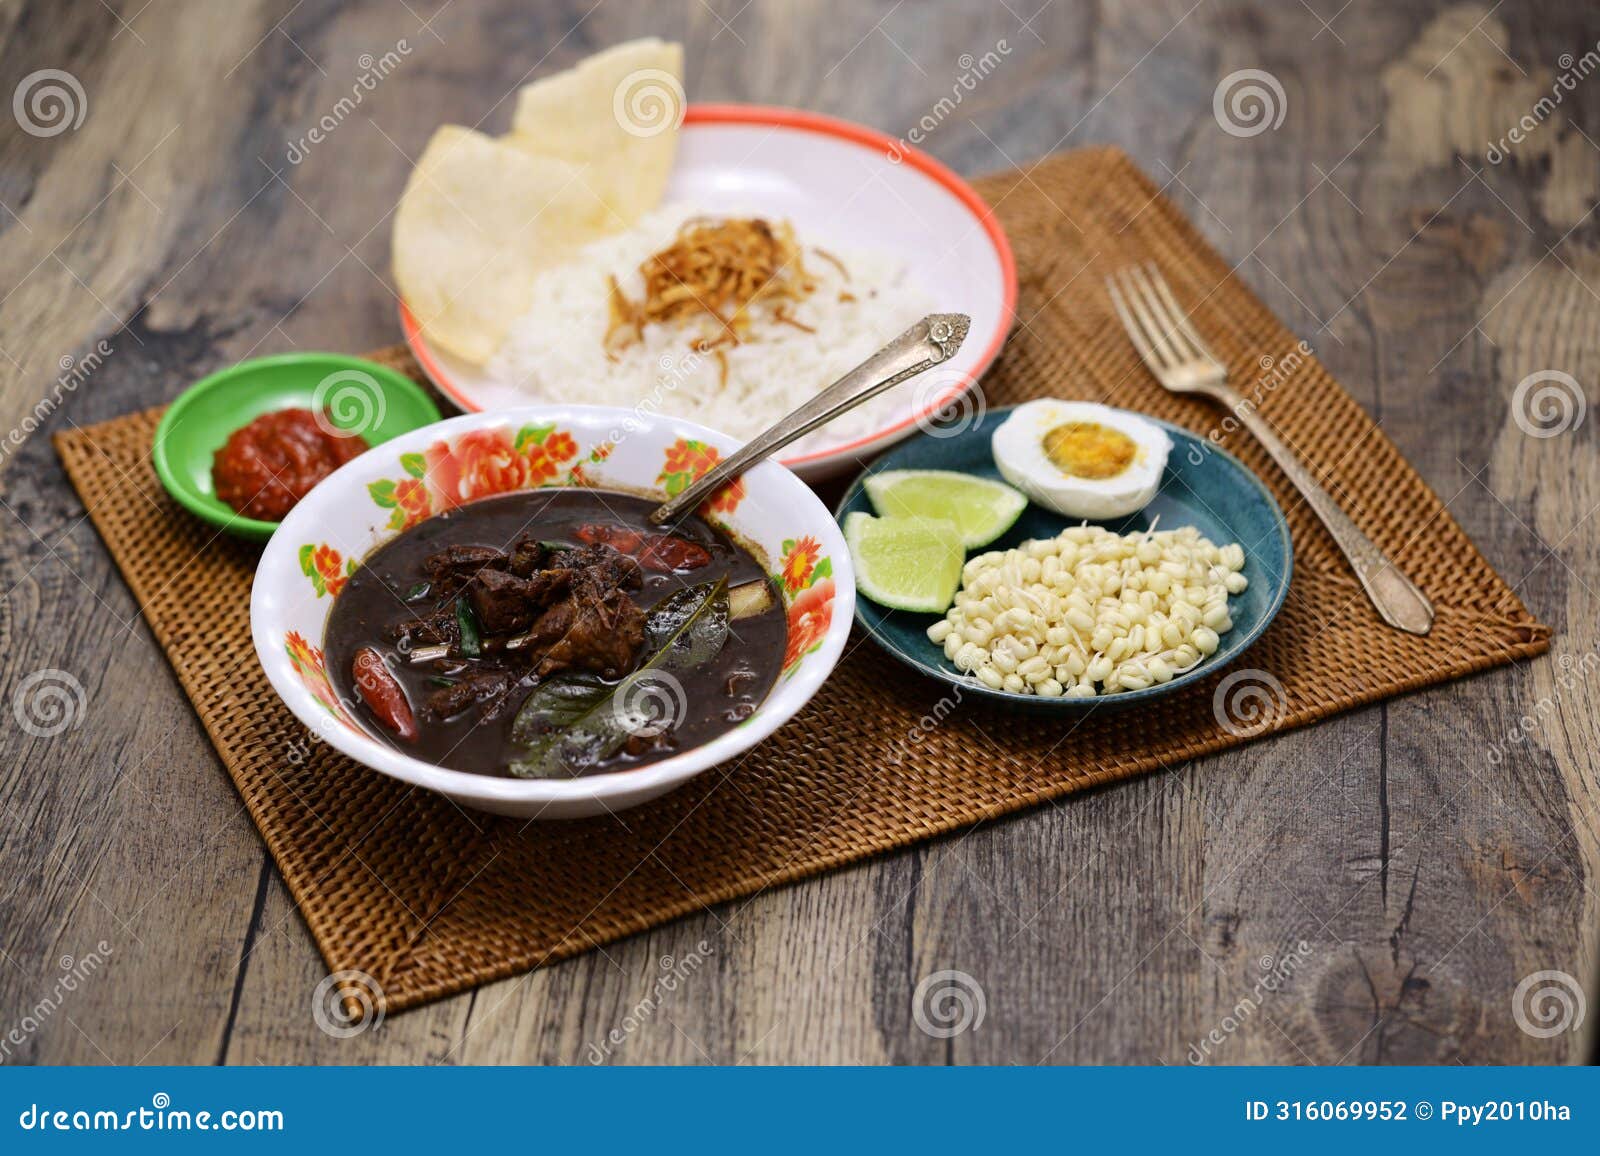 nasi rawon, indonesian black beef soup with rice.